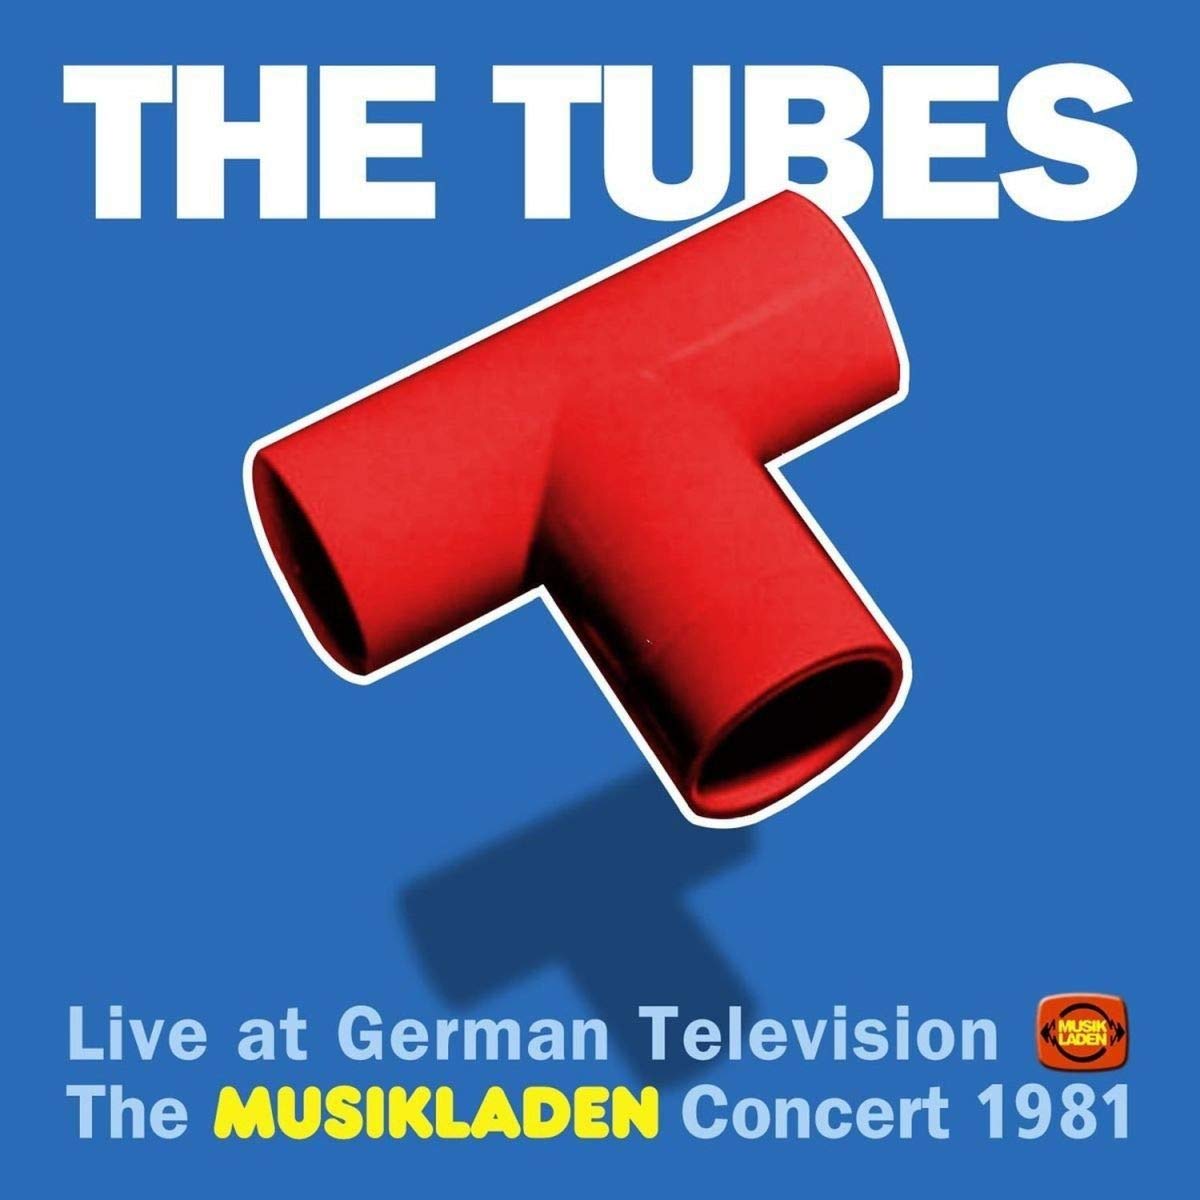 The Tubes - The Musikladen Concert 1981 - CD